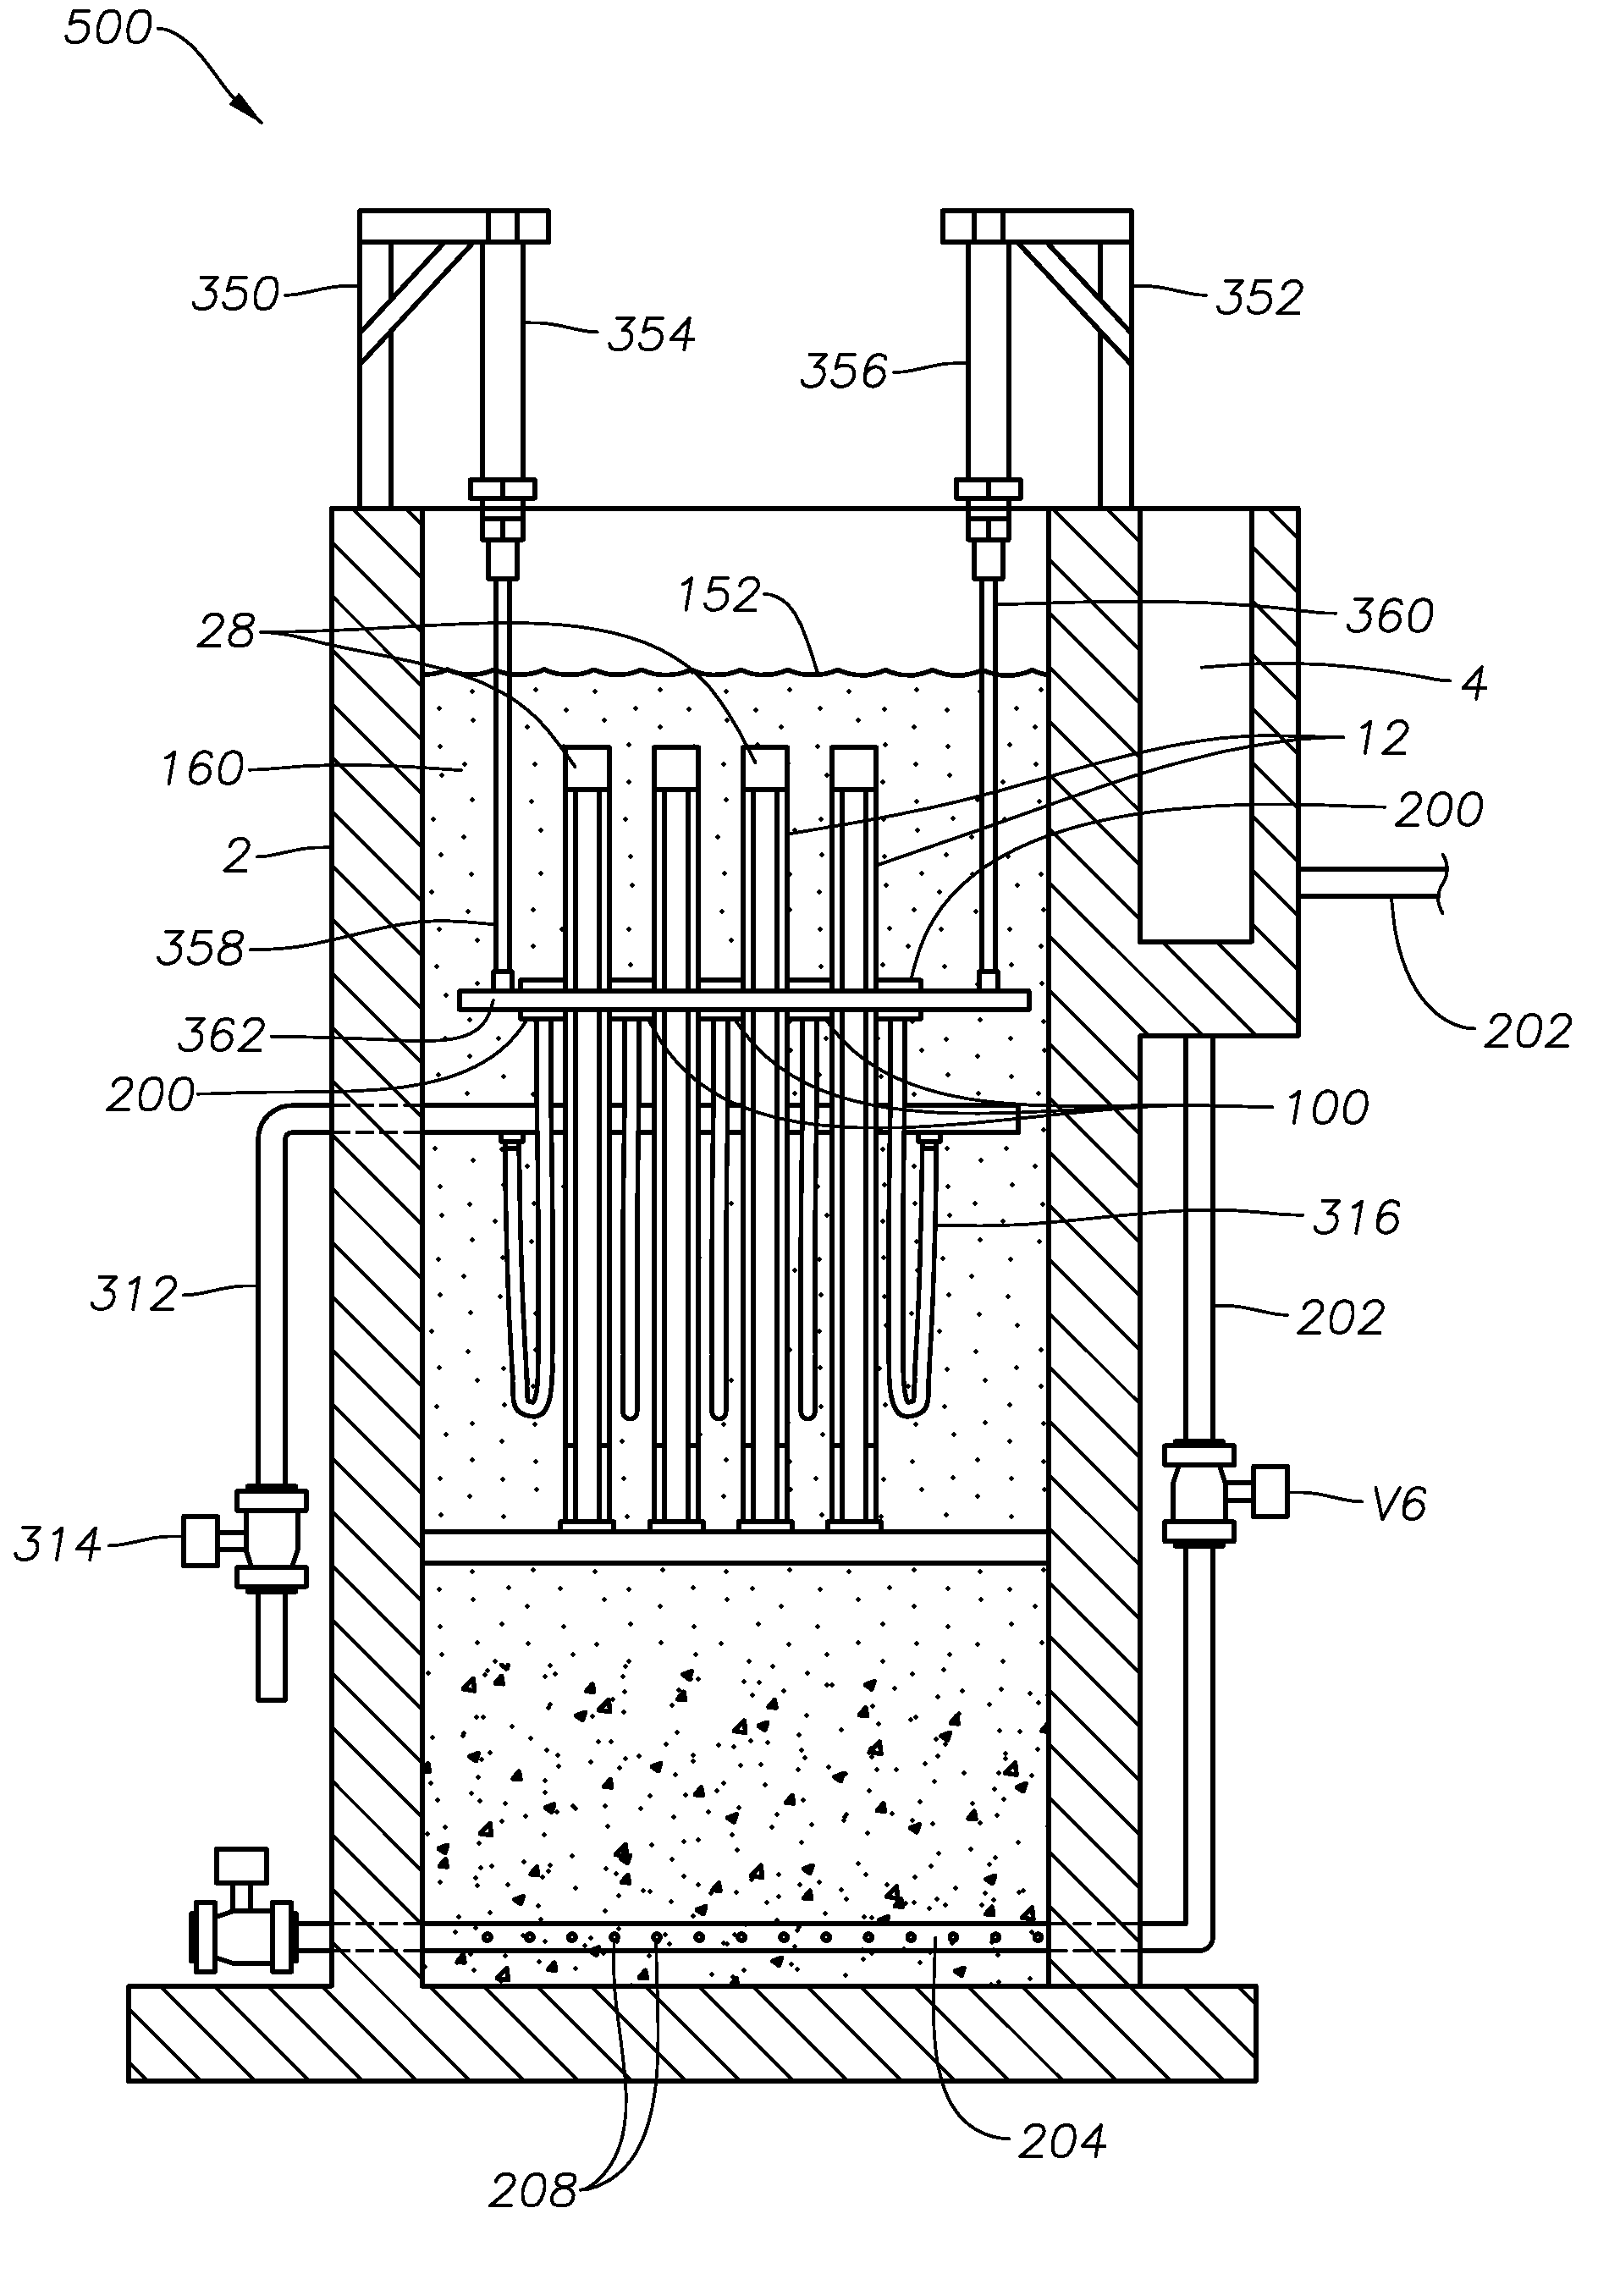 Methods and apparatus for treating water and wastewater employing a cloth filter